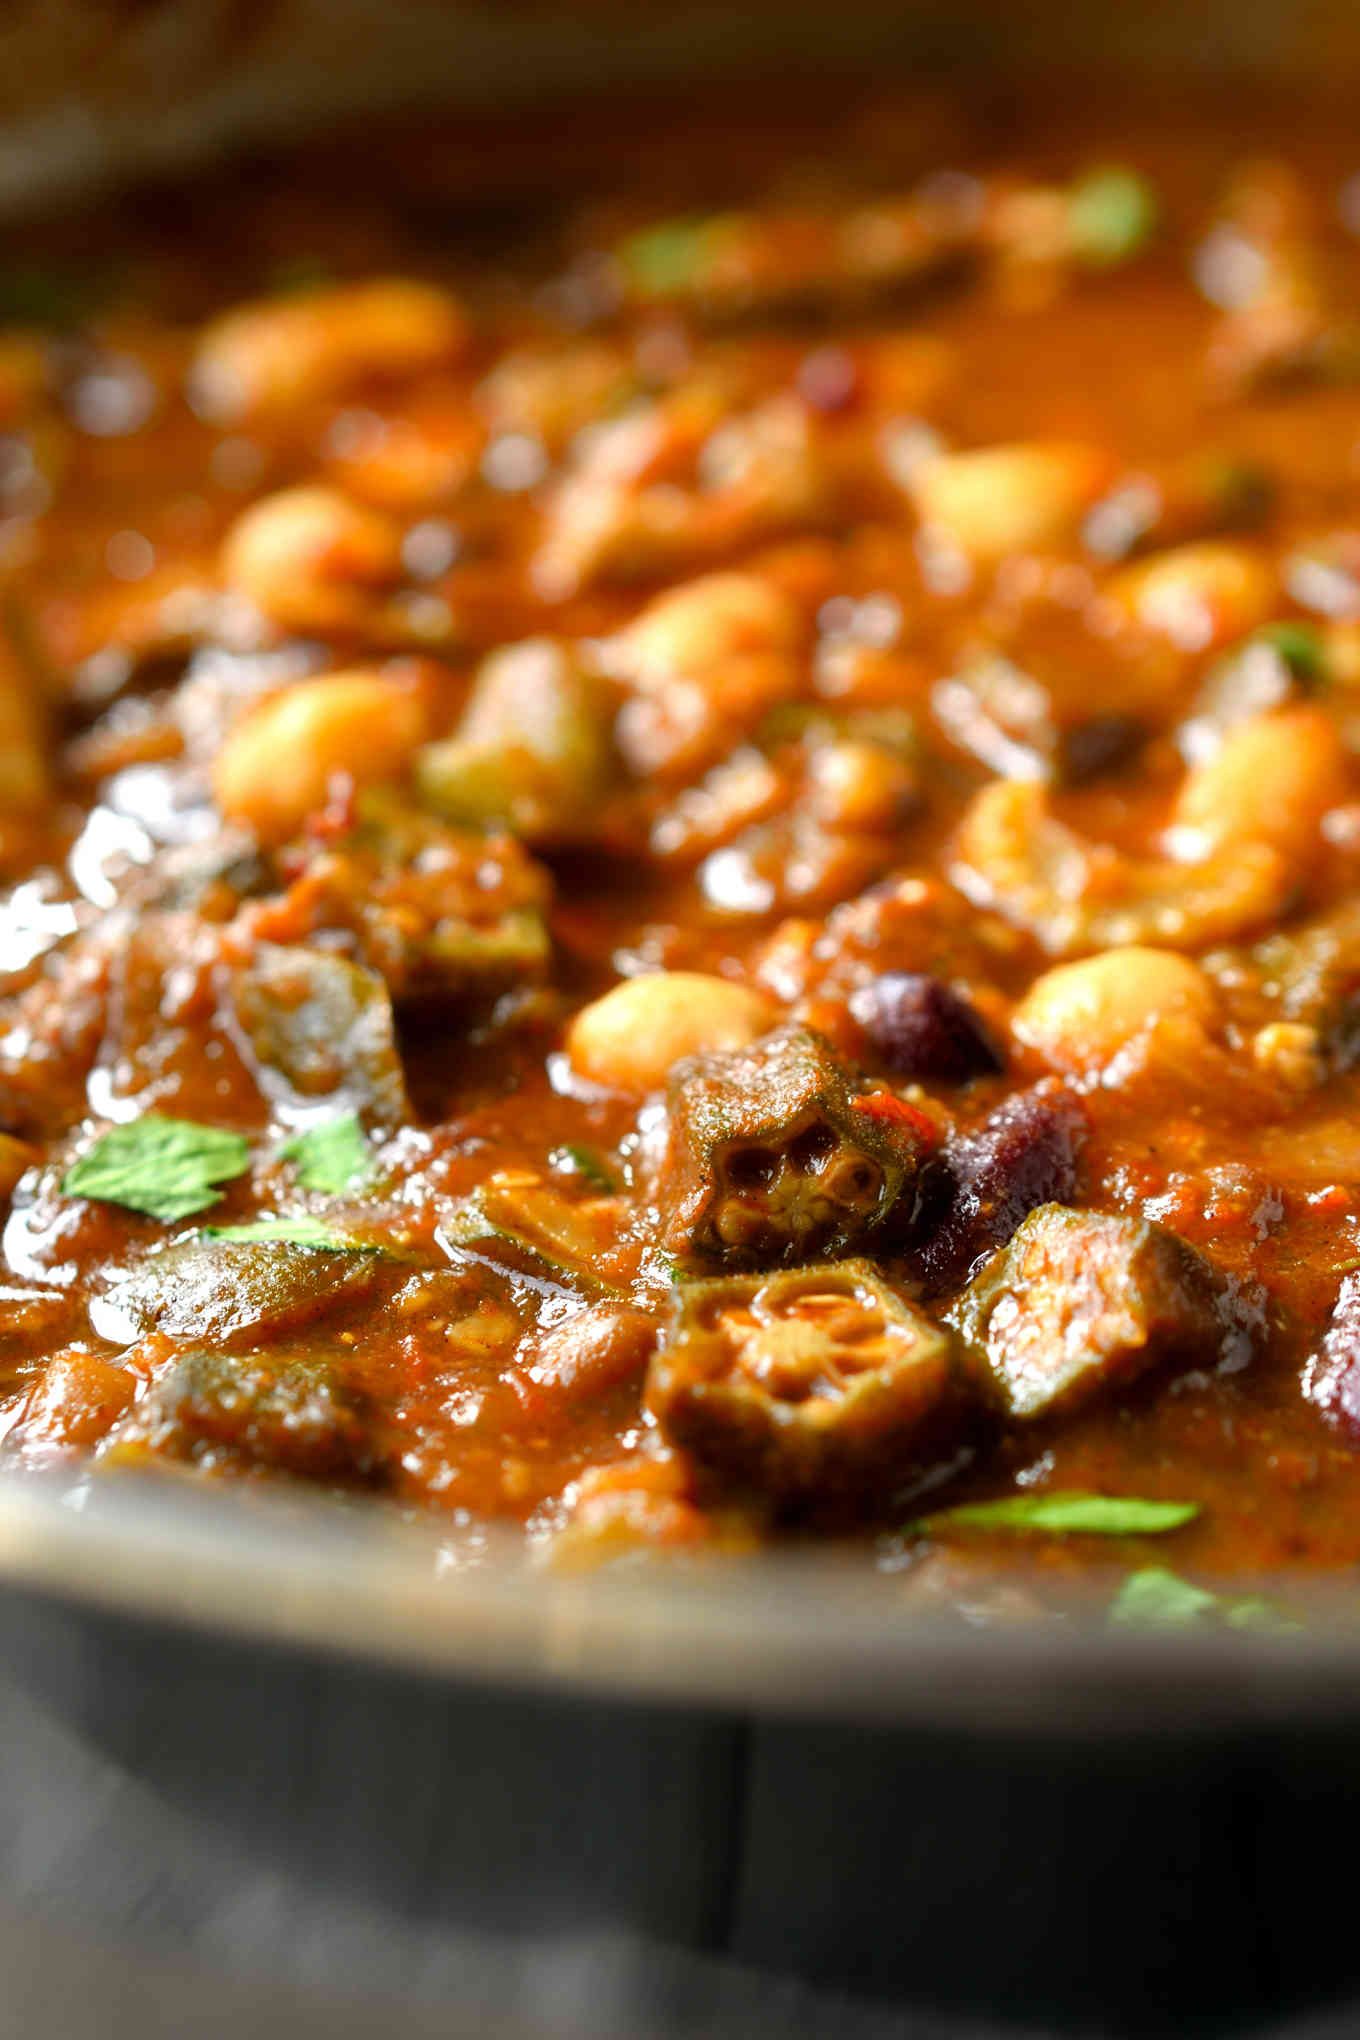 This vegan gumbo recipe is hearty, savory, filling and warming. With a mix of beans, mushrooms and okra, this vegetarian gumbo is cheap to make and full of flavour. Starting with a dark, rich roux, key herbs and spices, and a secret umami ingredient, it’s hard to believe that this vegan gumbo doesn’t have any meat in it!